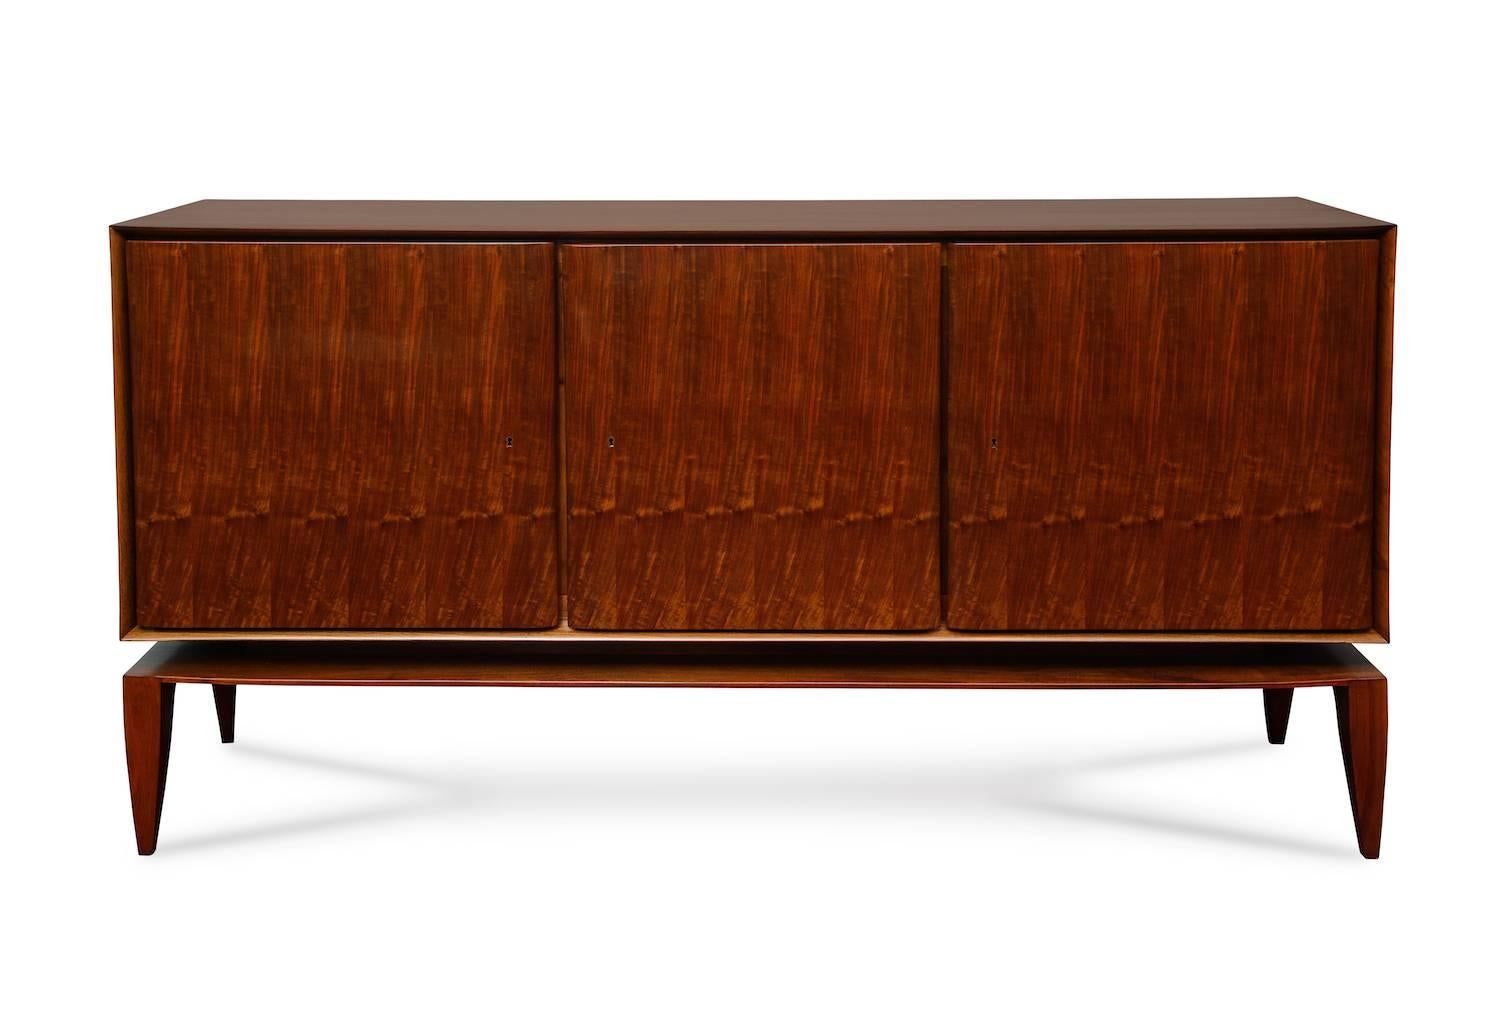 Rare Three-Door Floating Cabinet by Gio Ponti for M. Singer & Sons. Mahogany cabinet raised on tapering legs. Three knife-edge doors, set into a beveled frame so the doors appear to float. Interior drawers and open shelves. This cabinet was